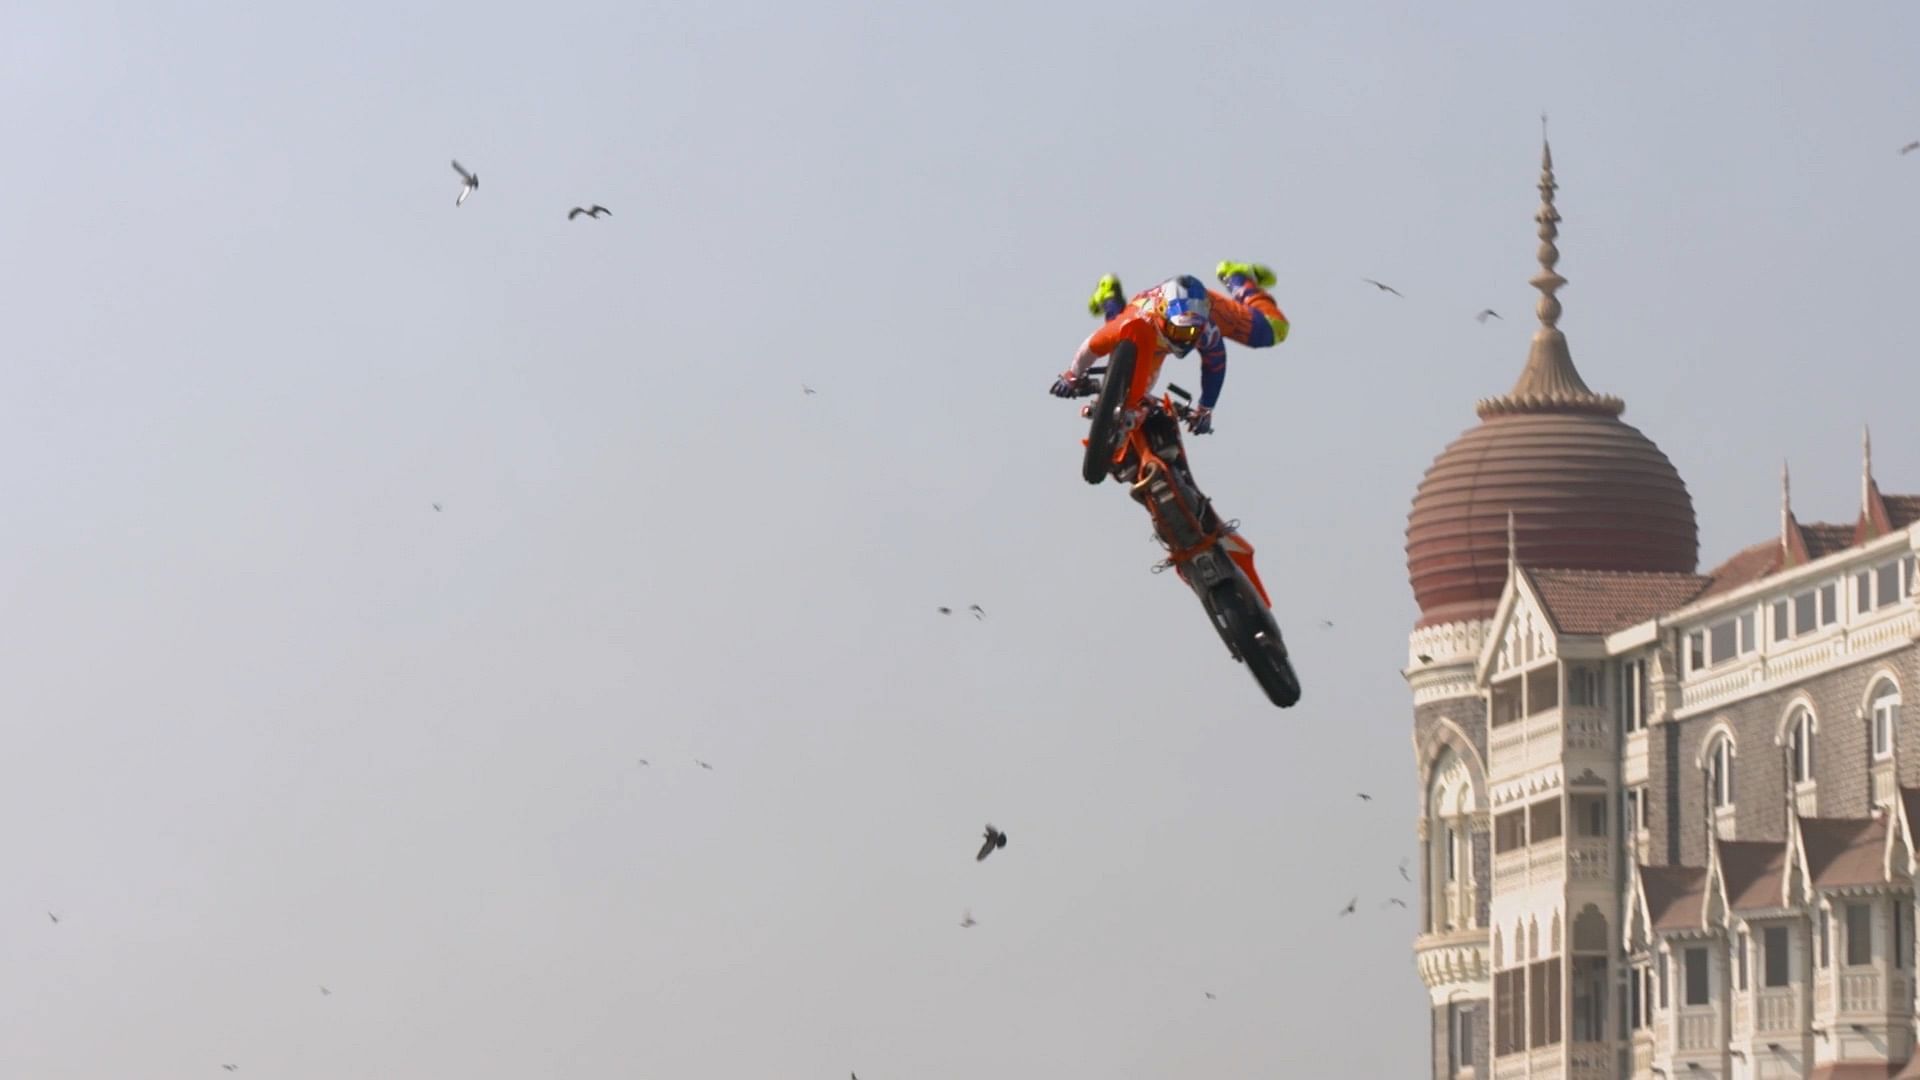 Robbie Maddison performing stunts at the Iconic Gateway of India for the FMX Jam.